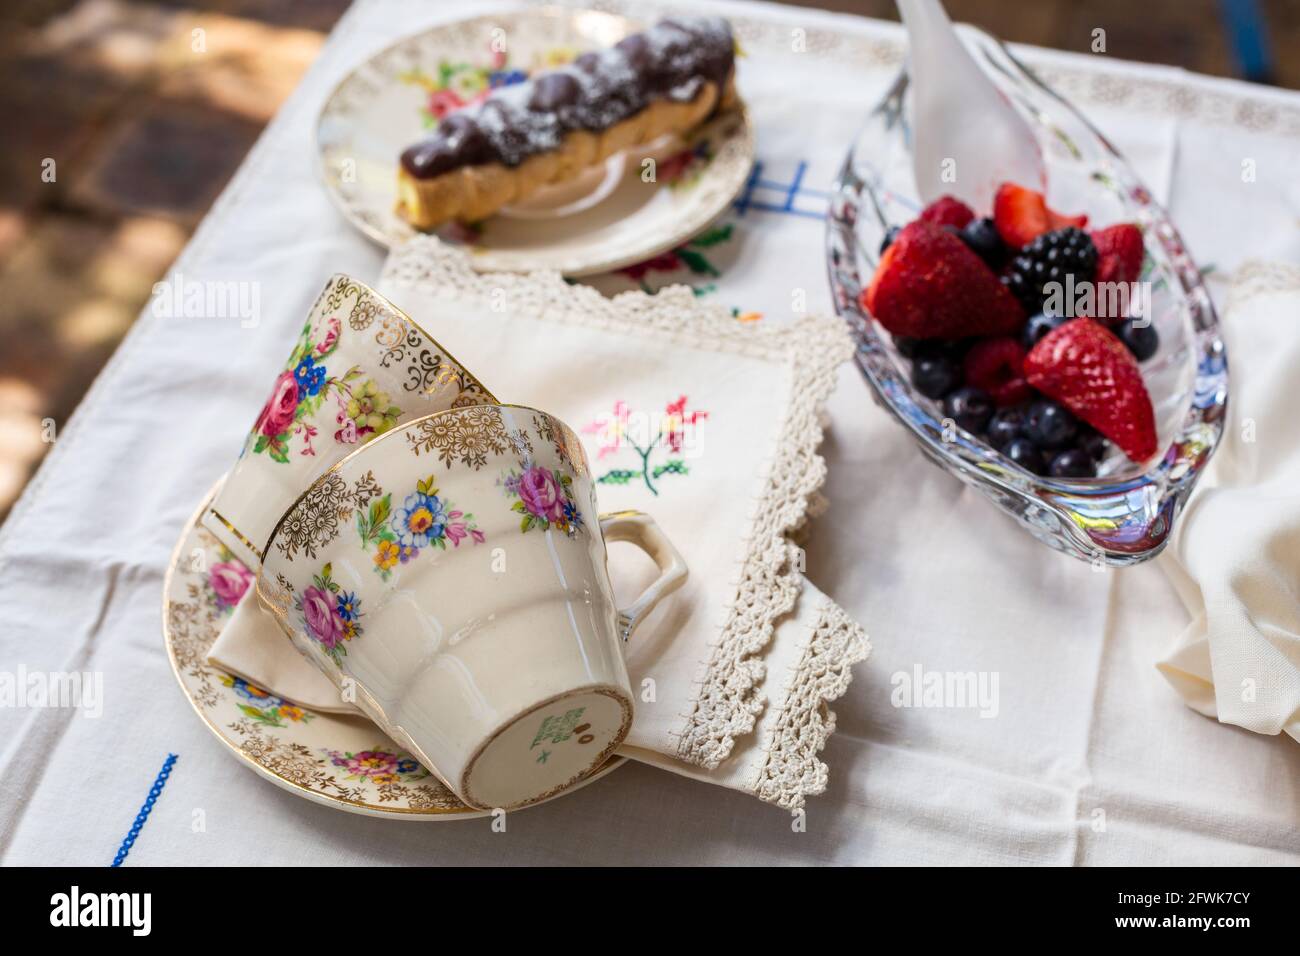 Outdoor afternoon tea setting, tea cups, fruit and choclate eclair Stock Photo